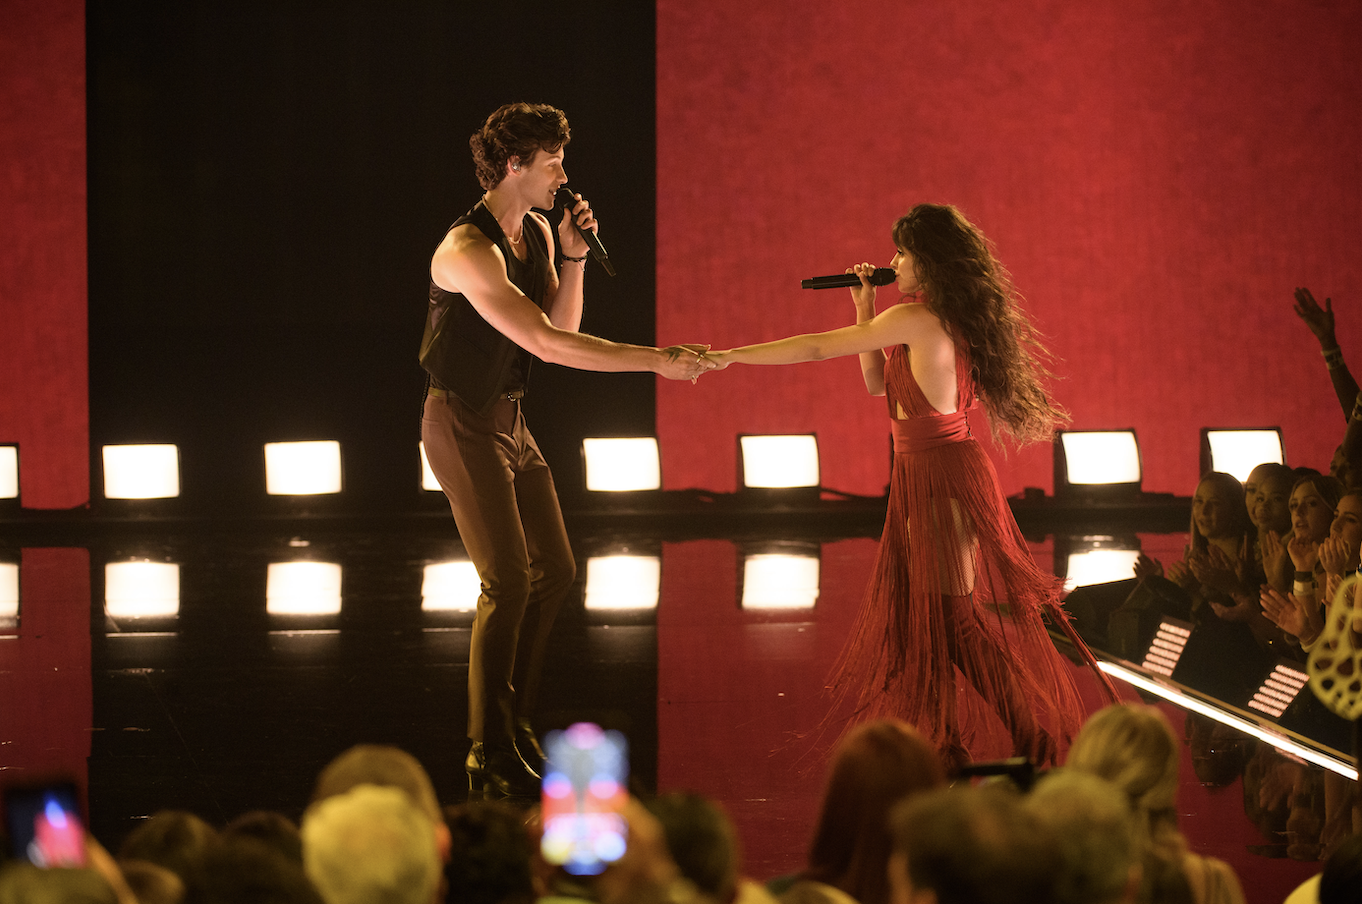 Shawn Mendes and Camila Cabello perform at the 2019 American Music Awards